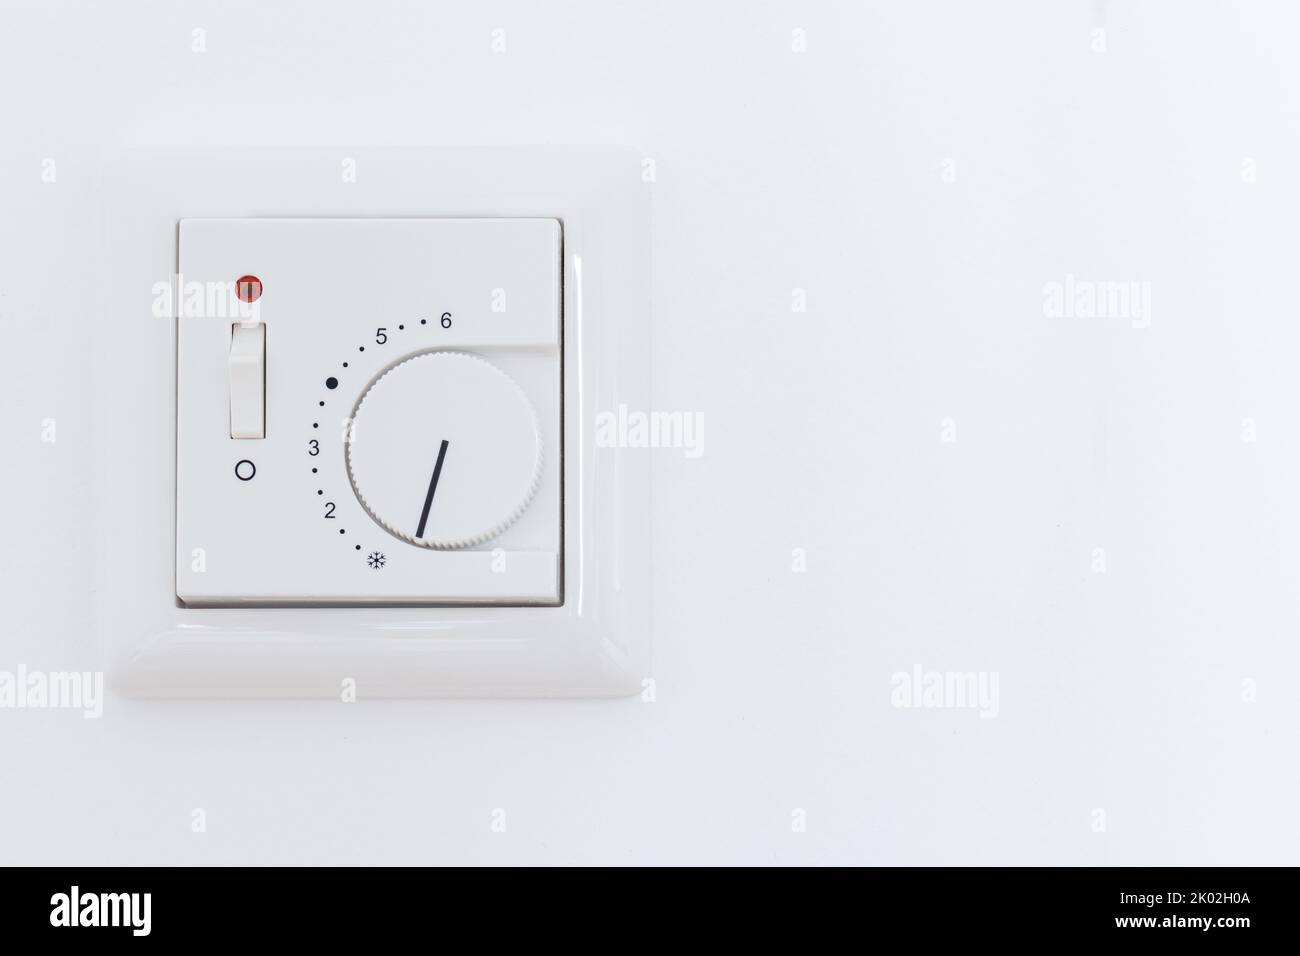 Thermostat heating switch on wall Stock Photo